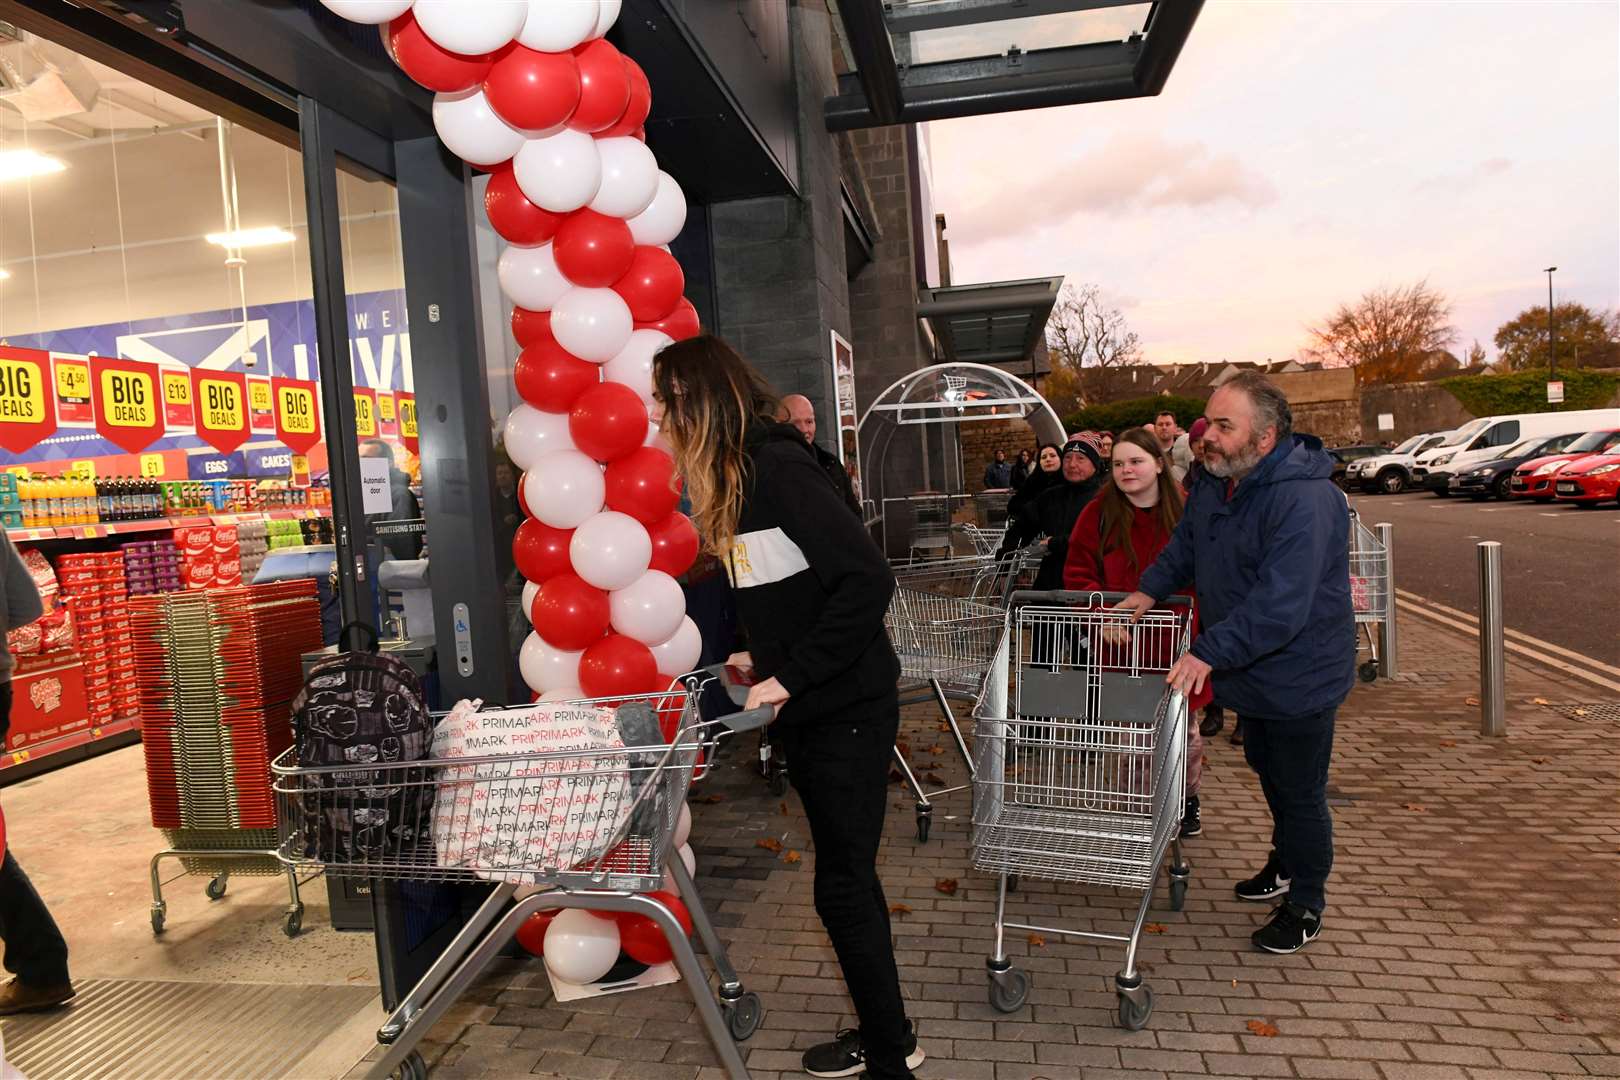 Shoppers heading into the store. Picture: Callum Mackay